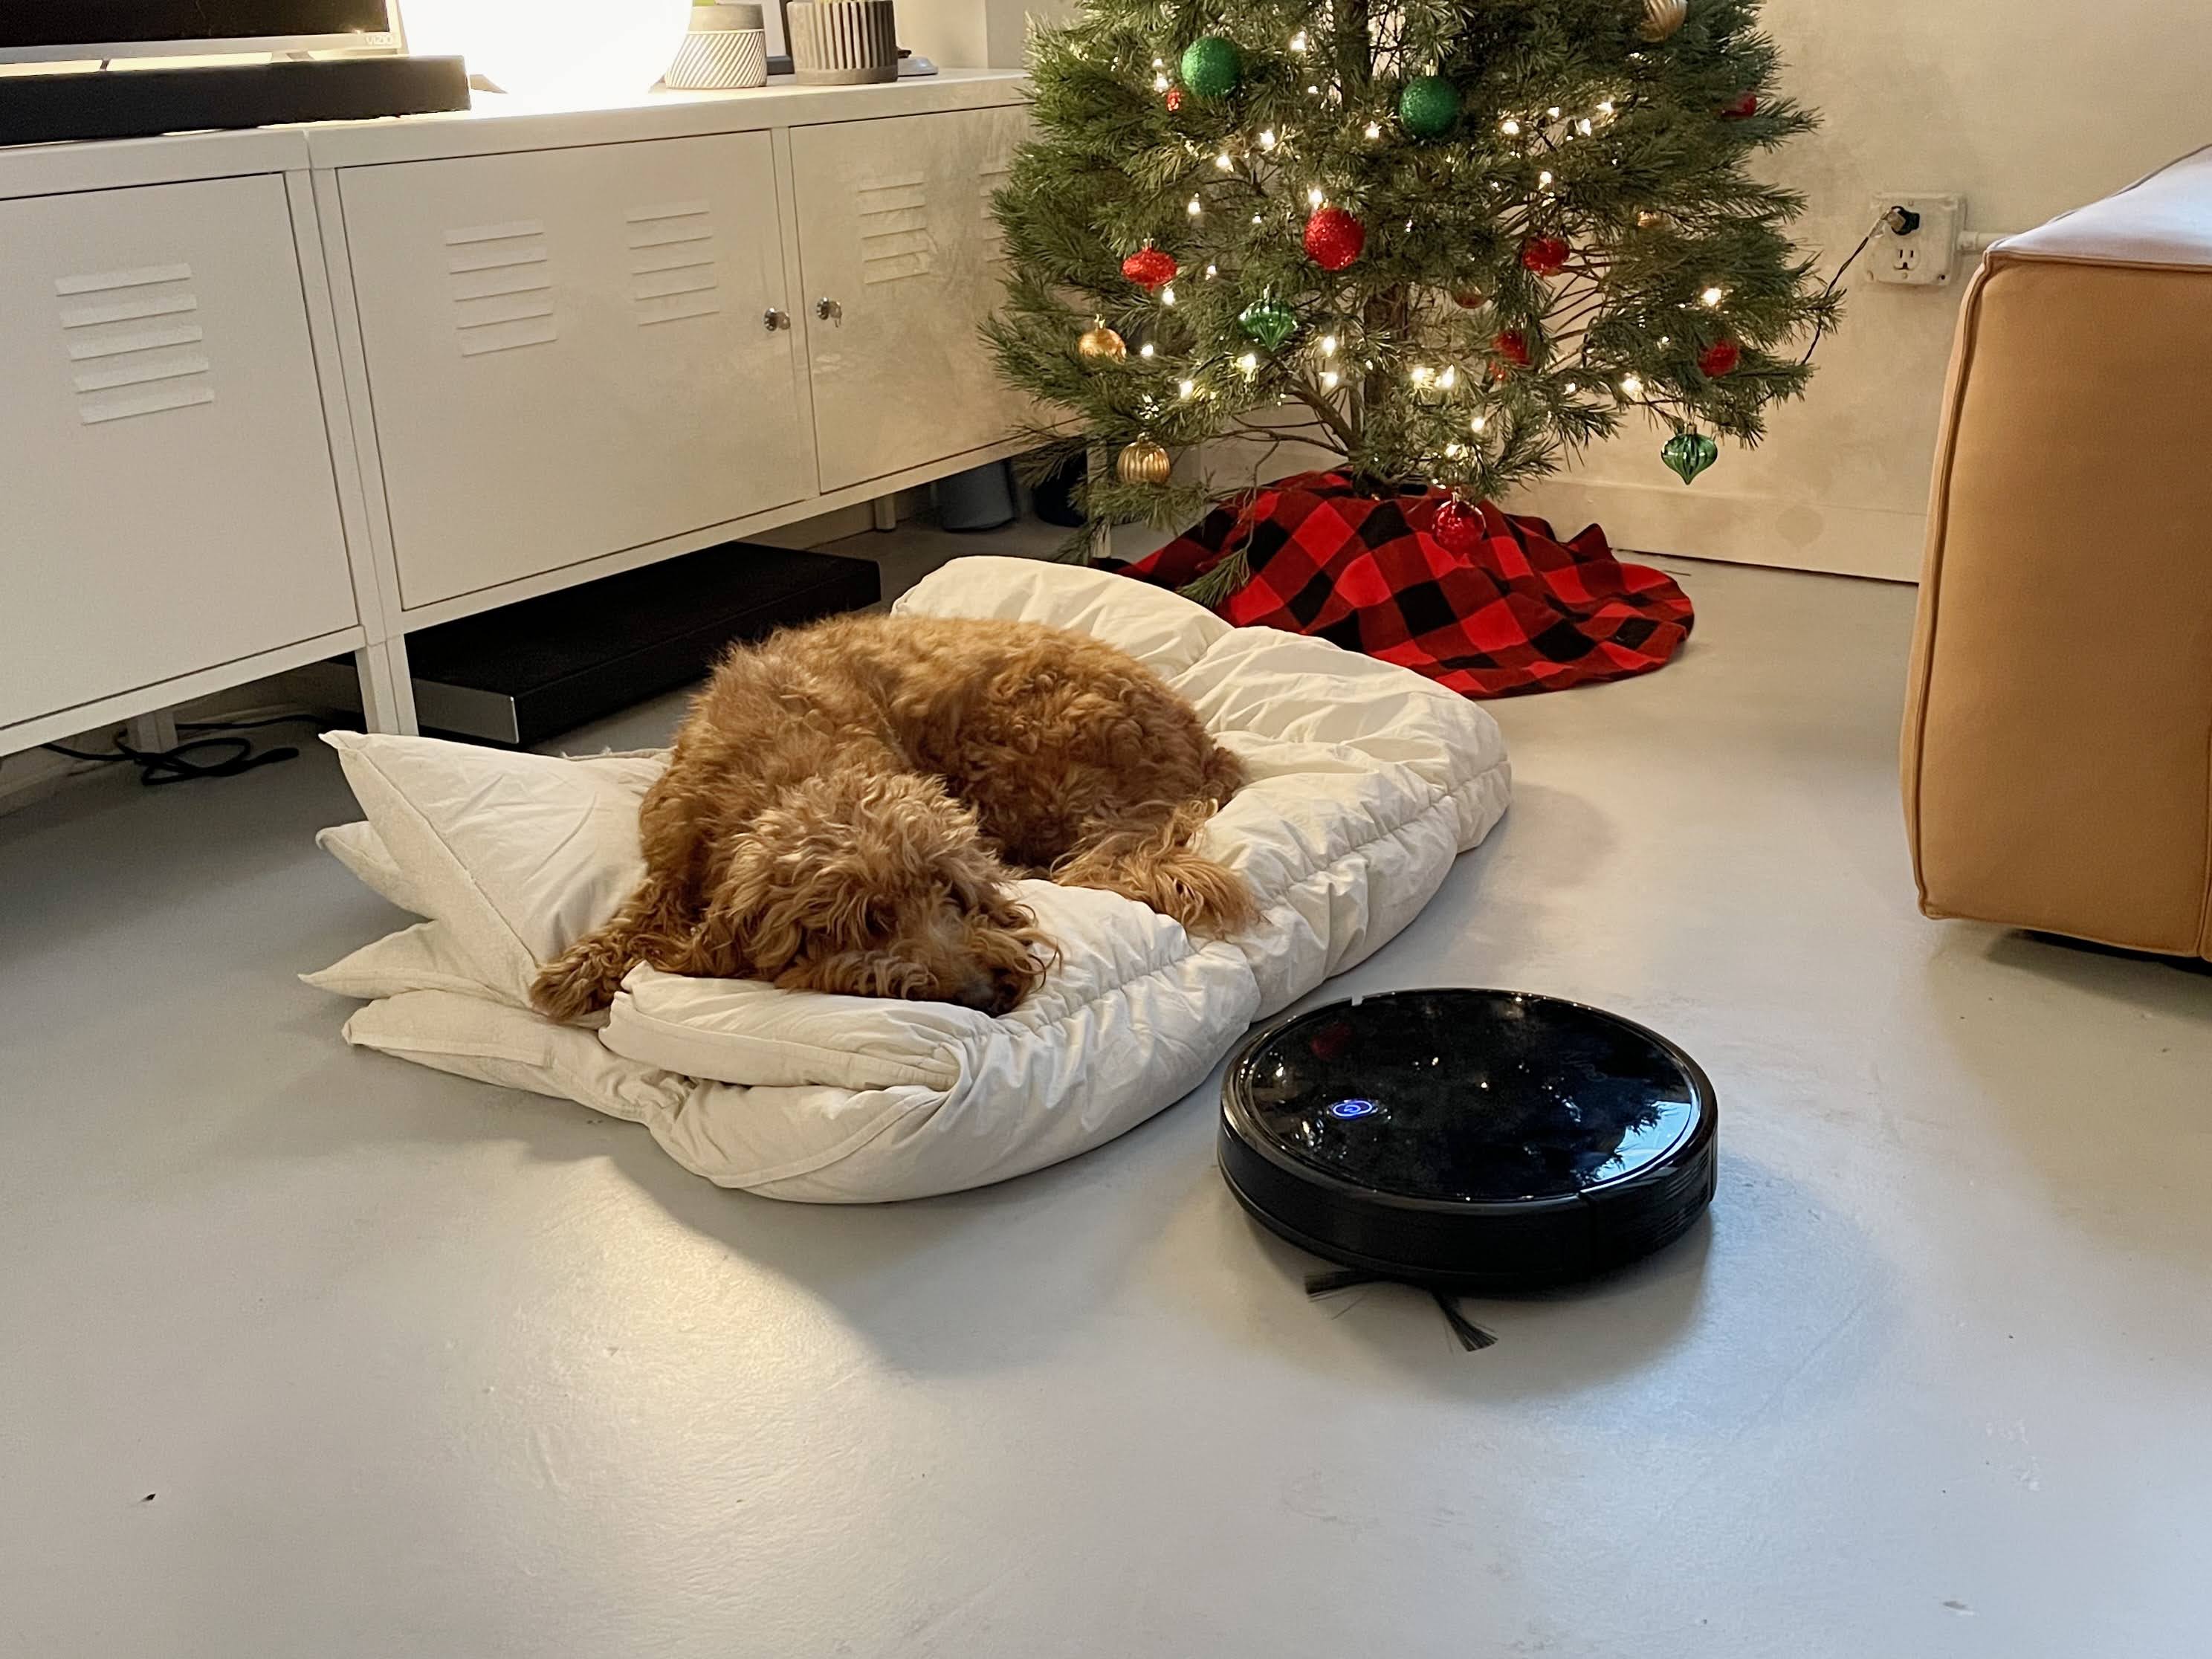 Eufy RoboVac 11S Robot Vacuum Review - Reviews - Product Notes